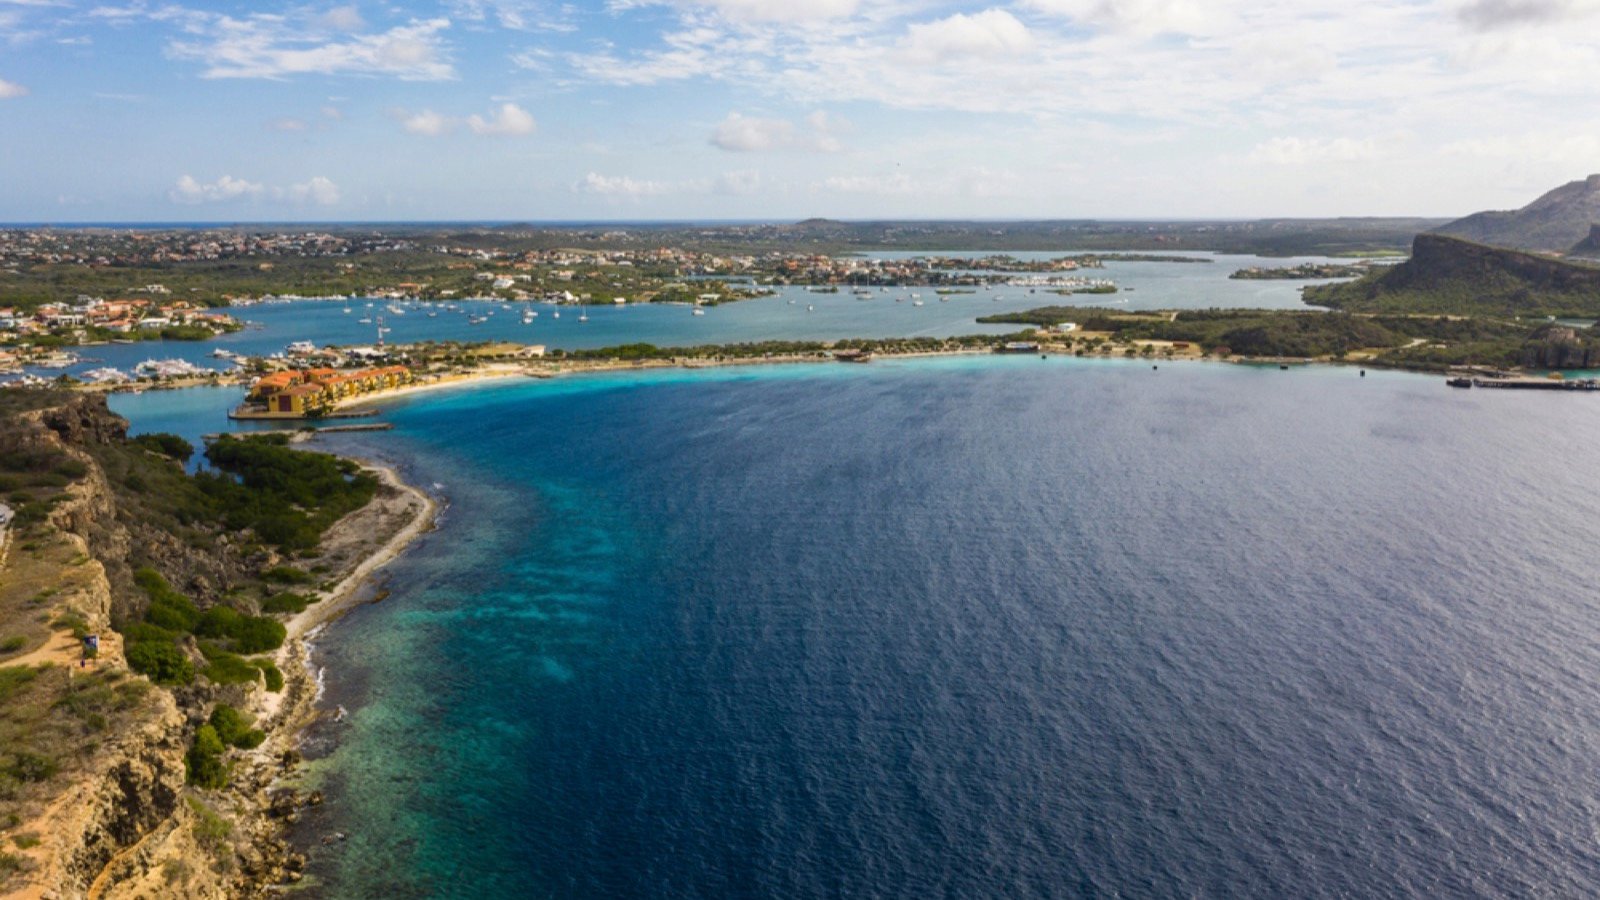 <p>Just a few hours away from Bonaire is the island of Curaçao. Head on over to Caracas Bay for some fantastic snorkeling adventures. One of the coolest sites is a well-preserved sunken tugboat. Snorkelers can get up close and personal with this sunken ship covered in reefs, crabs, and other sea life.</p>